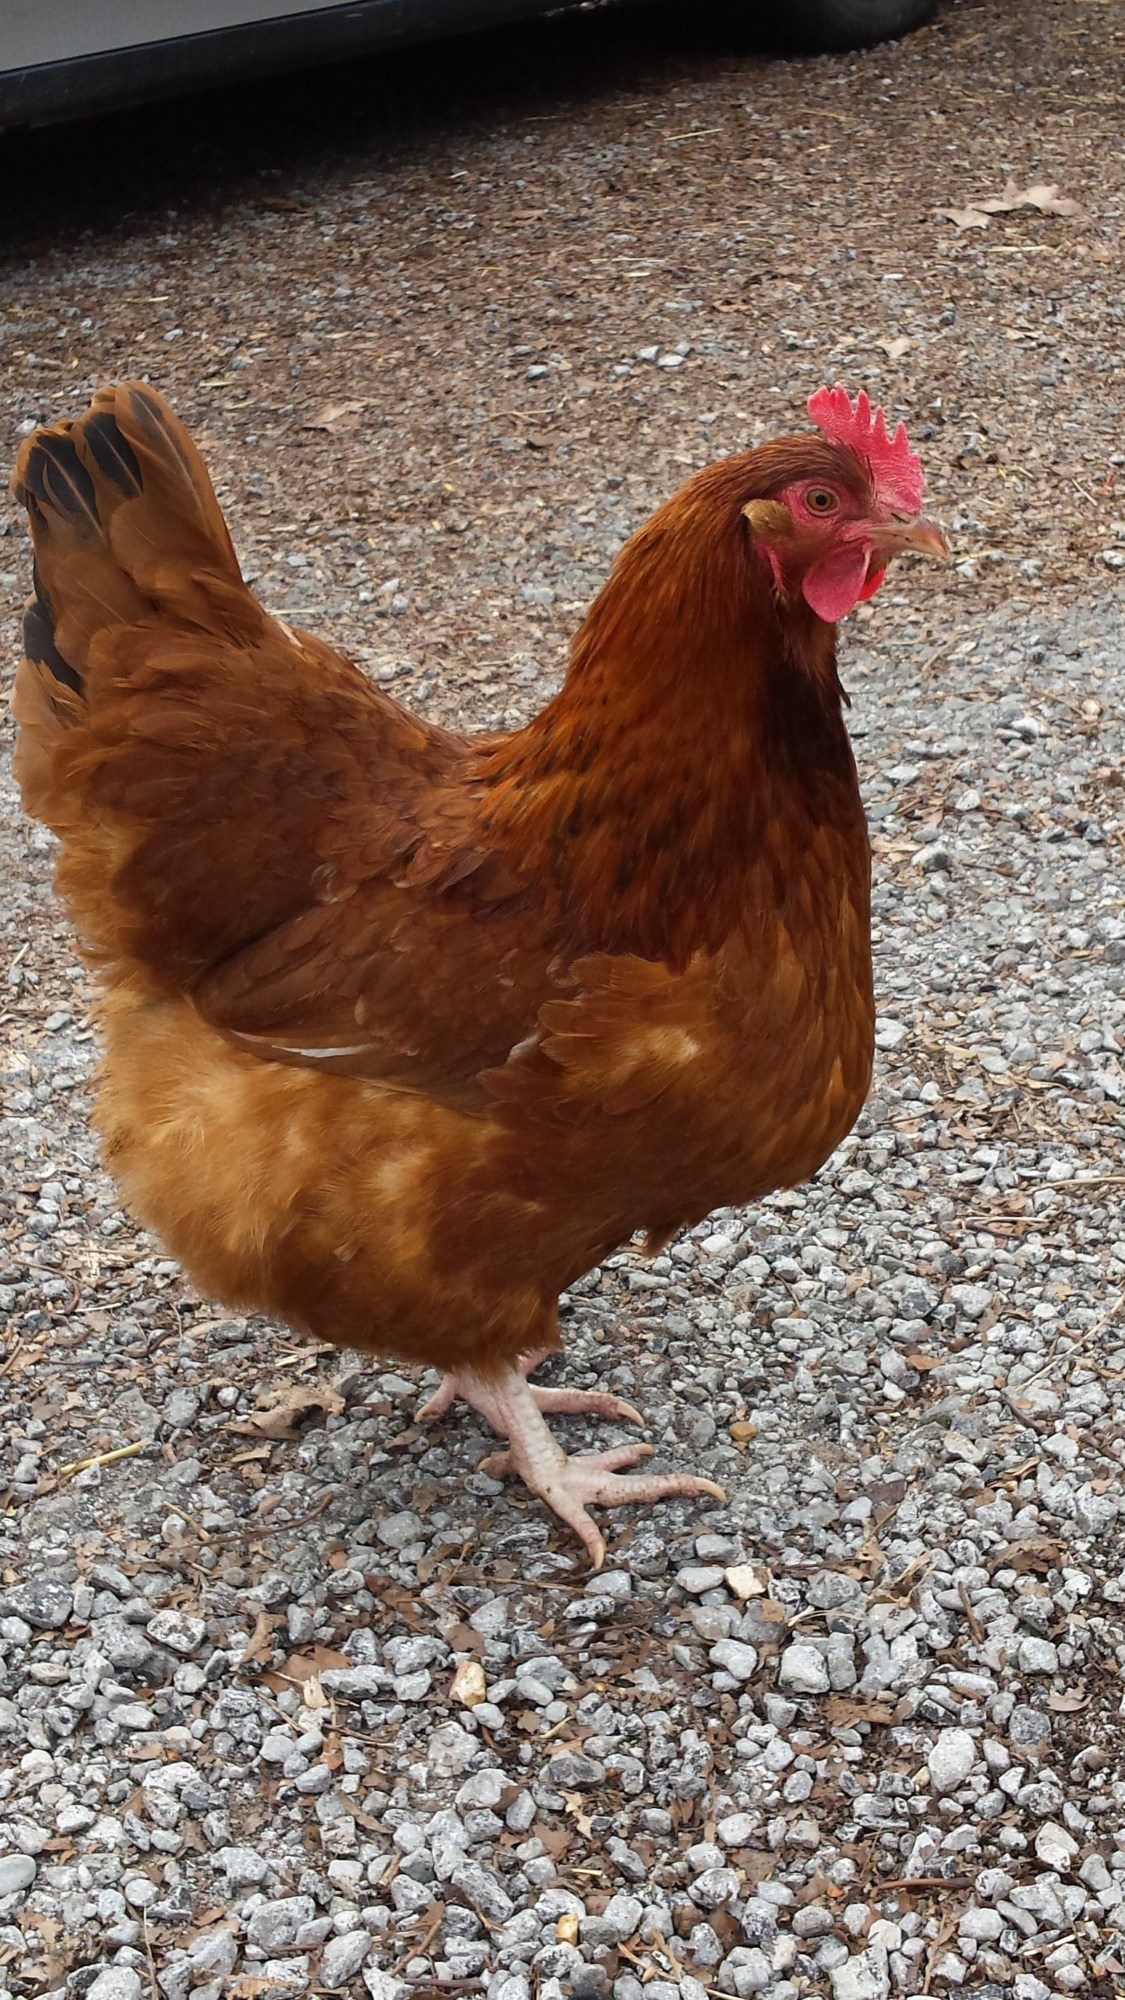 Scramble was supposed to have been a RIR mix, but I think she looks more like a production red. She lays smaller, darker brown eggs than my other hens.